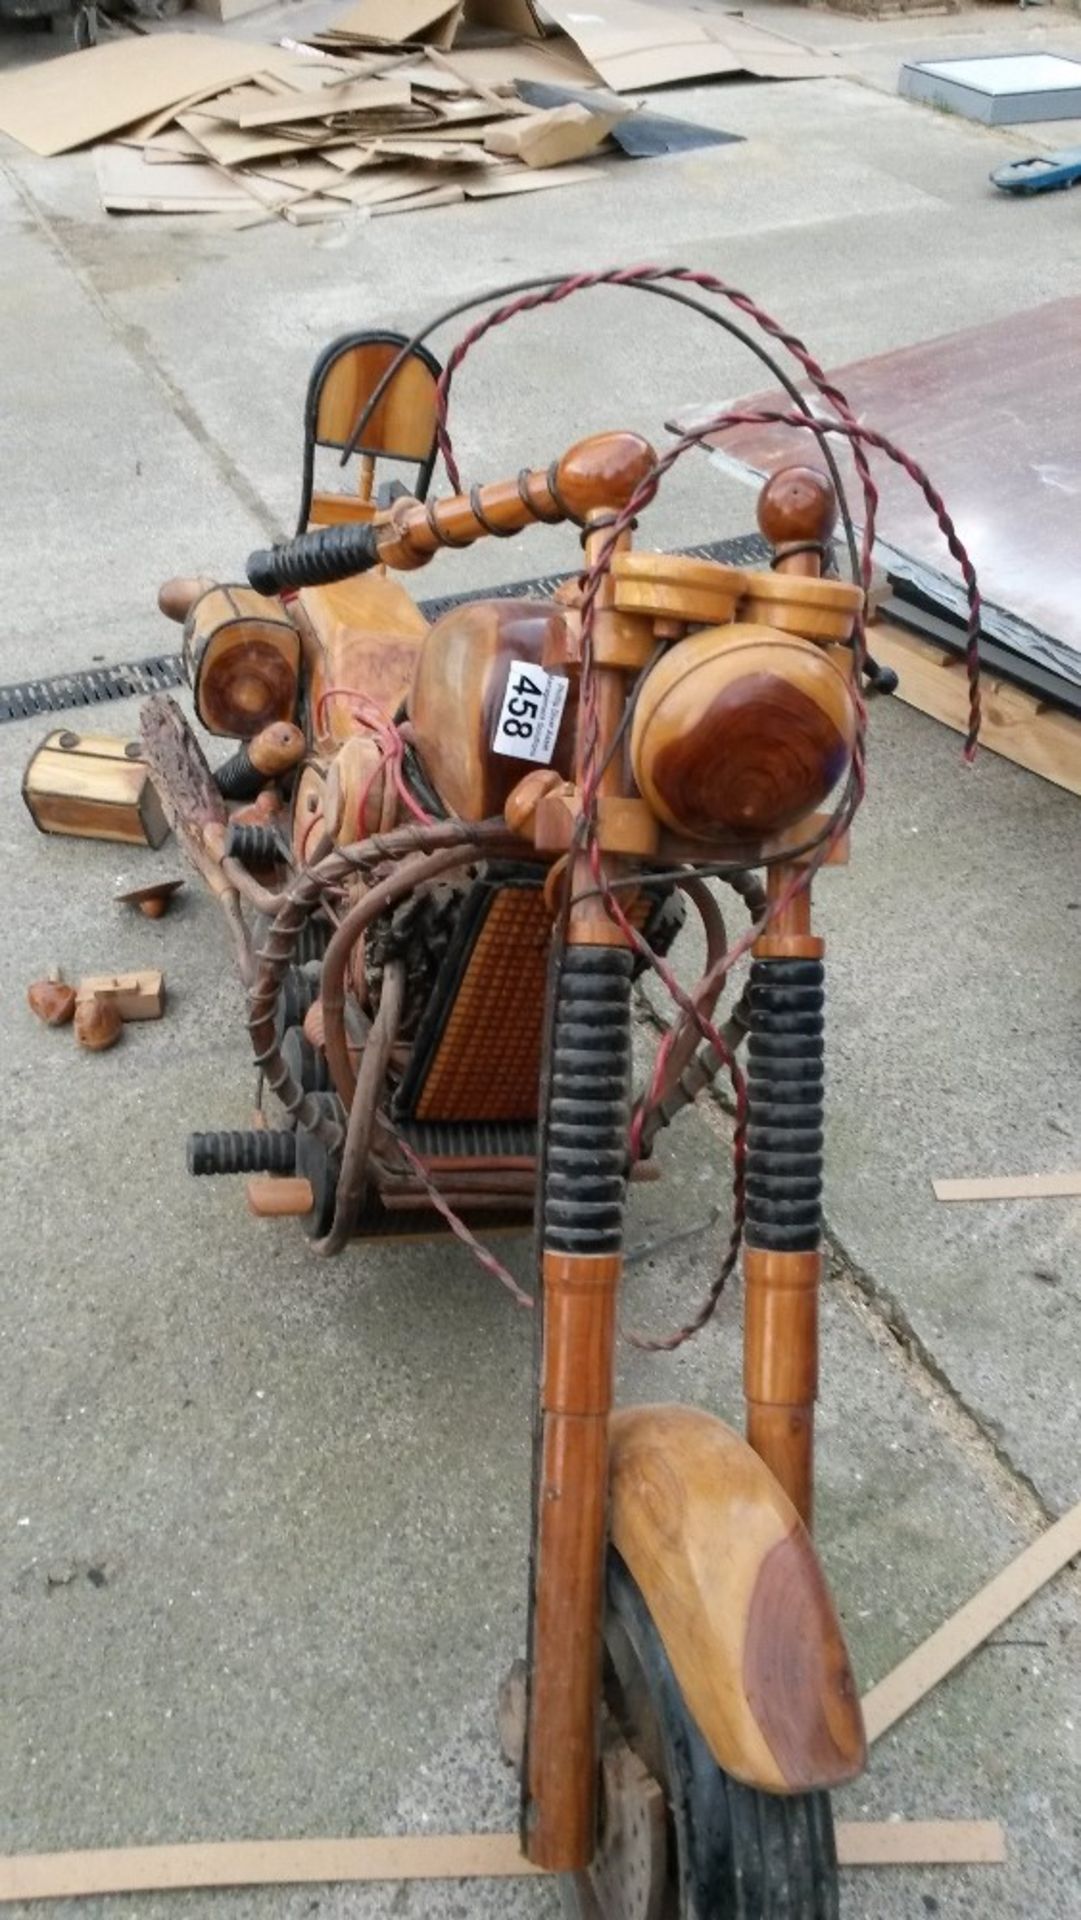 Replica piece - Wooden Harley Davidson was purchased 3 years ago for £3000, need a a little tlc, but - Image 2 of 2